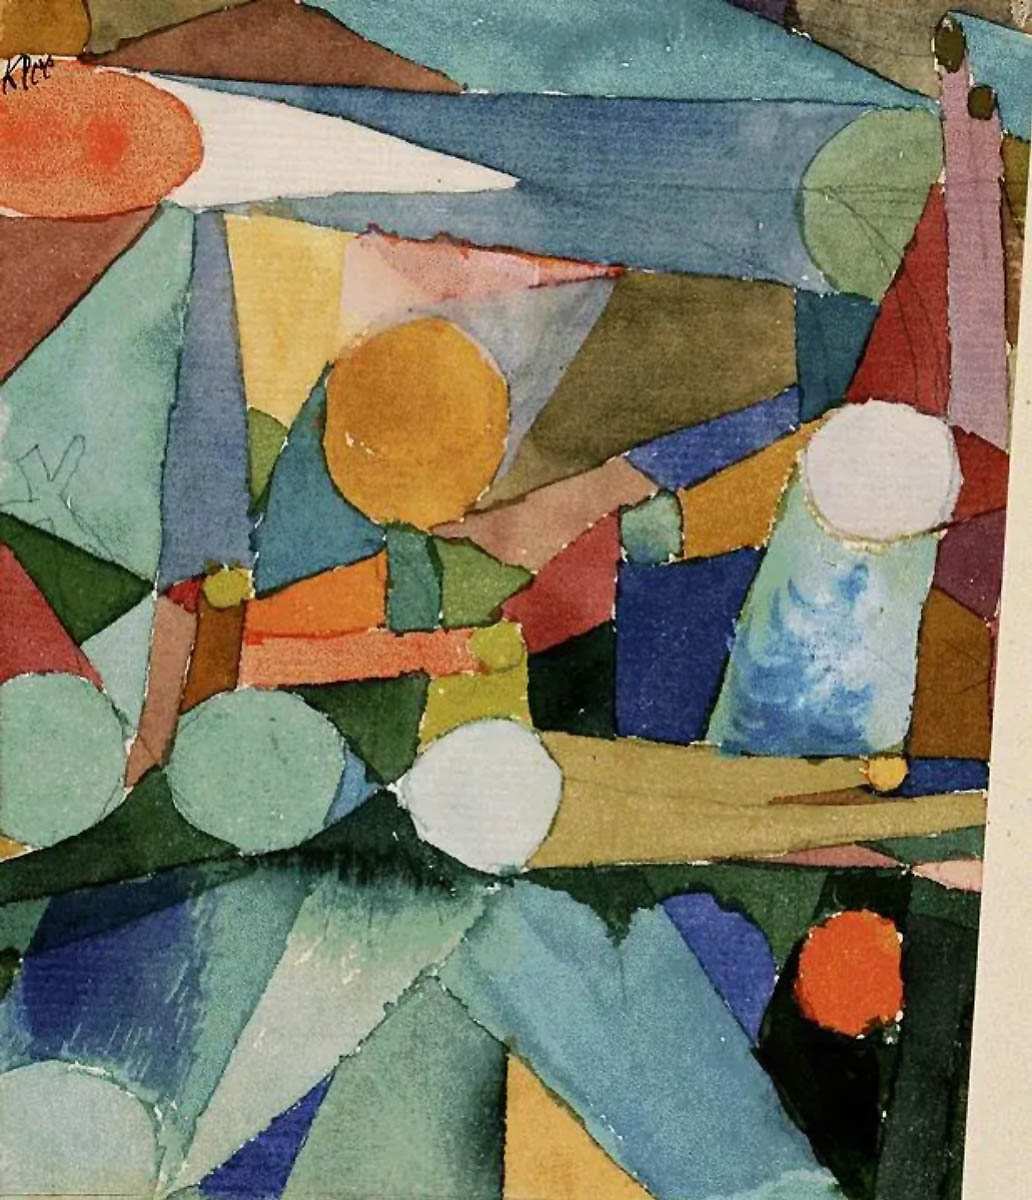 Circles connected with ribbons, Paul Klee, 1914, watercolor